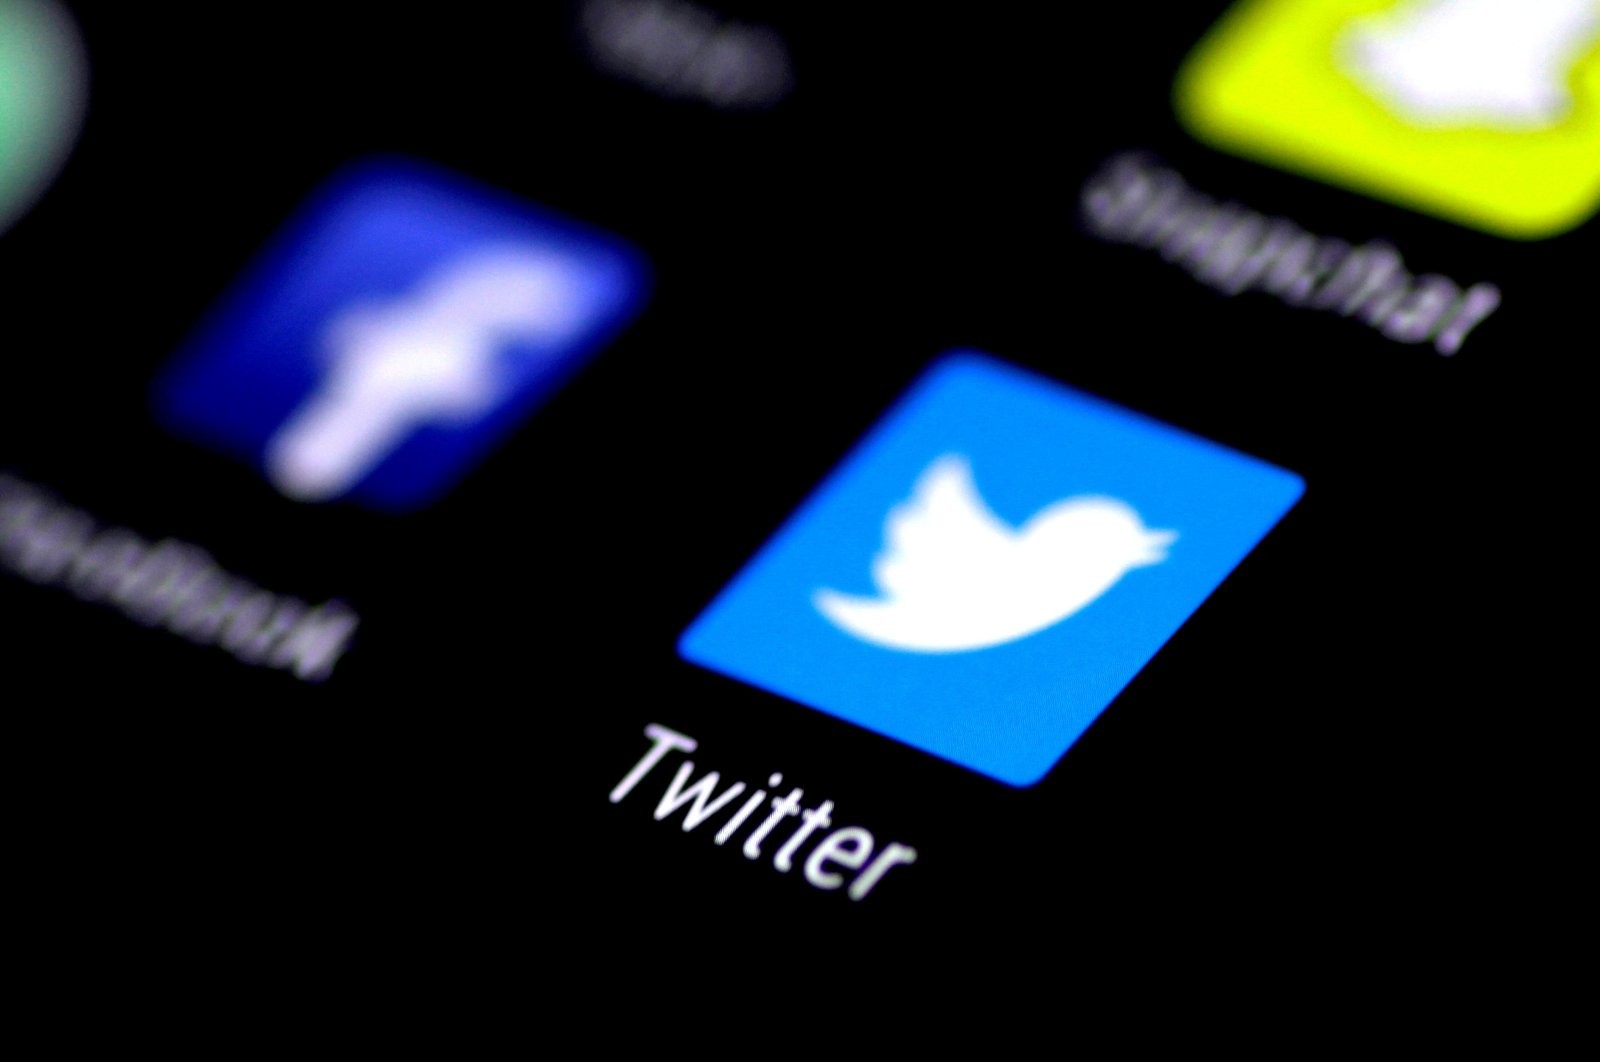 The Nigerian government is shutting down Twitter indefinitely